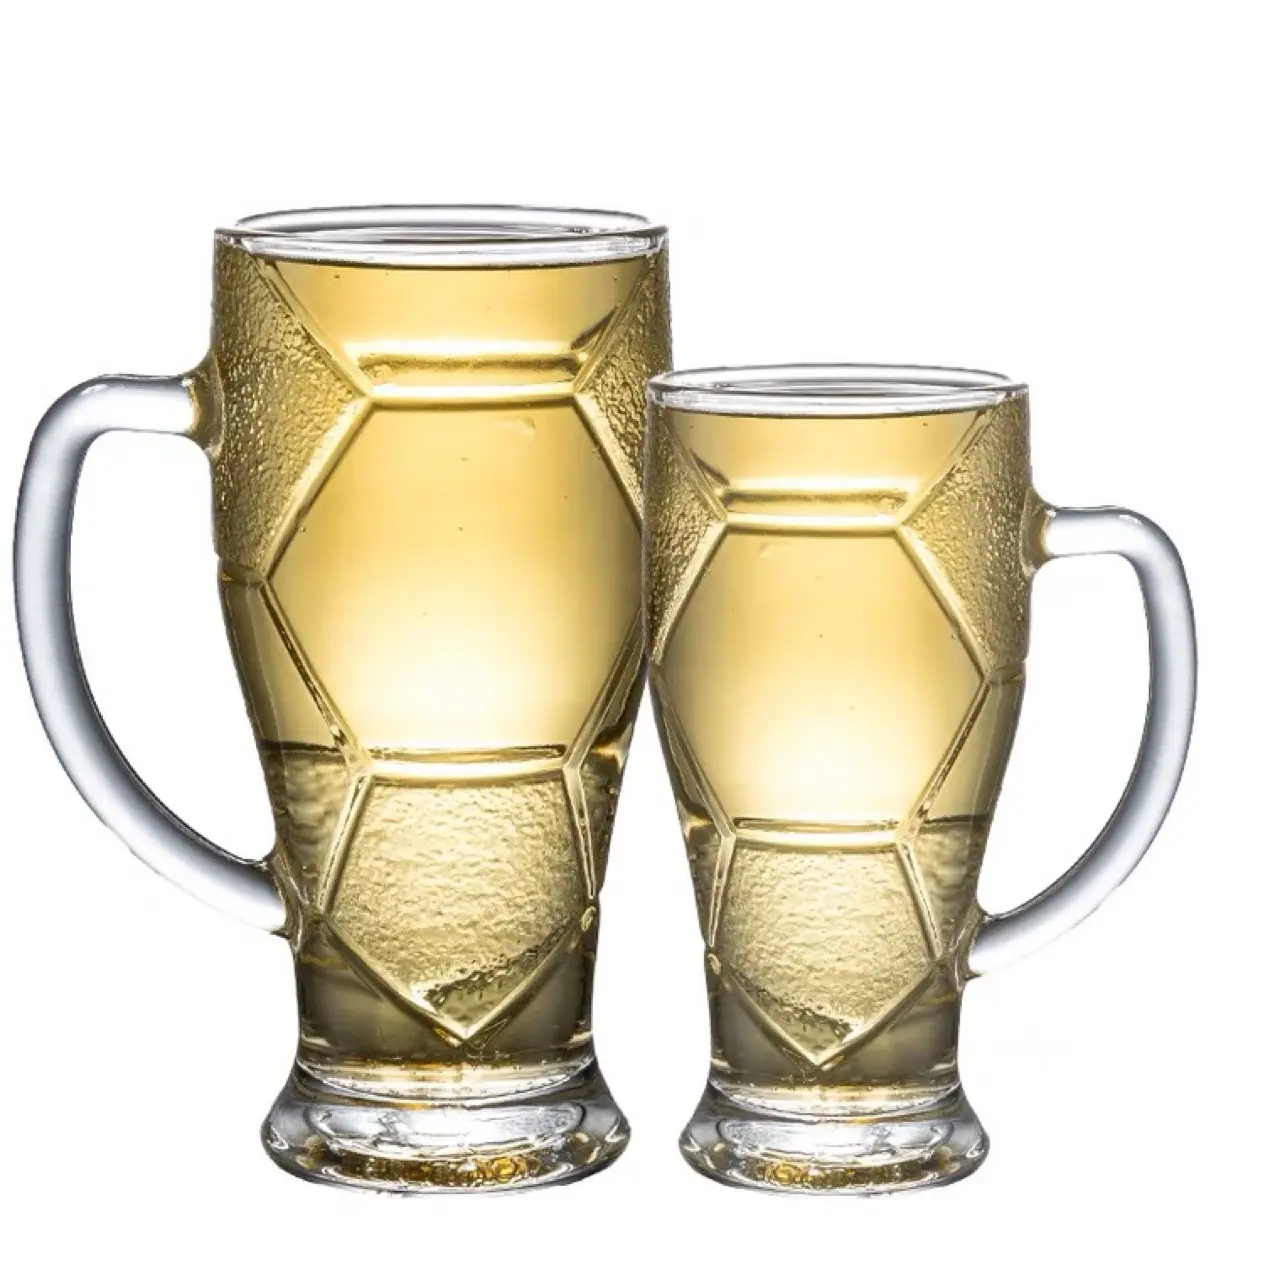 32 extra large thick football glass beer glass with handle custom printed glass cups